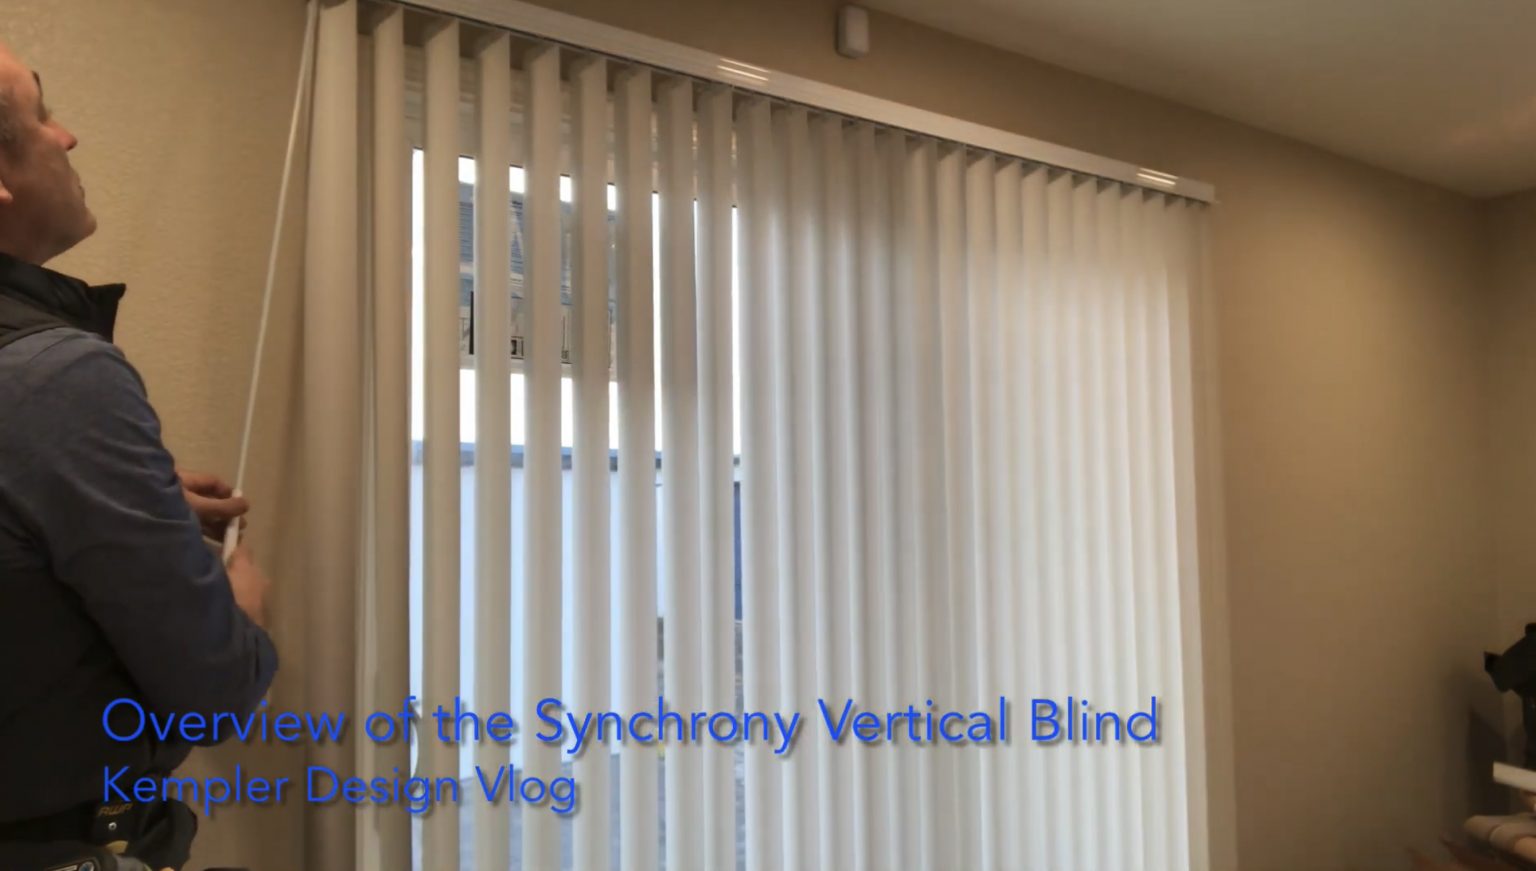 Overview of the Norman Synchrony Vertical Blinds Kempler Design